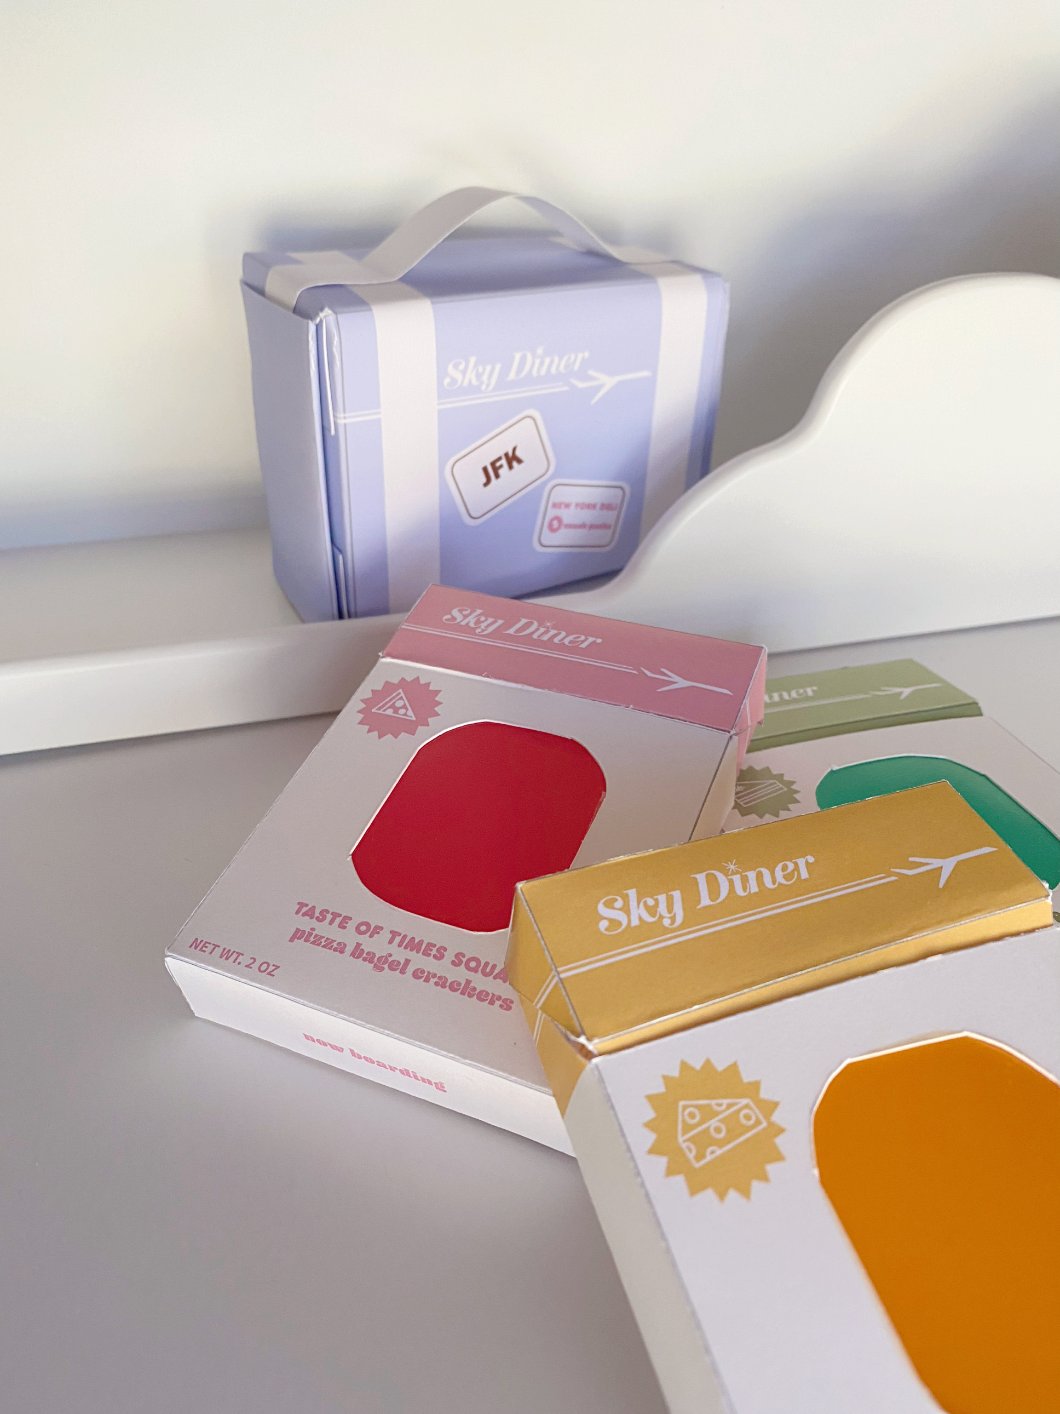 Katie Carone’s “Sky Diner” Imagines a Boxed-Up Snack Tour of New York